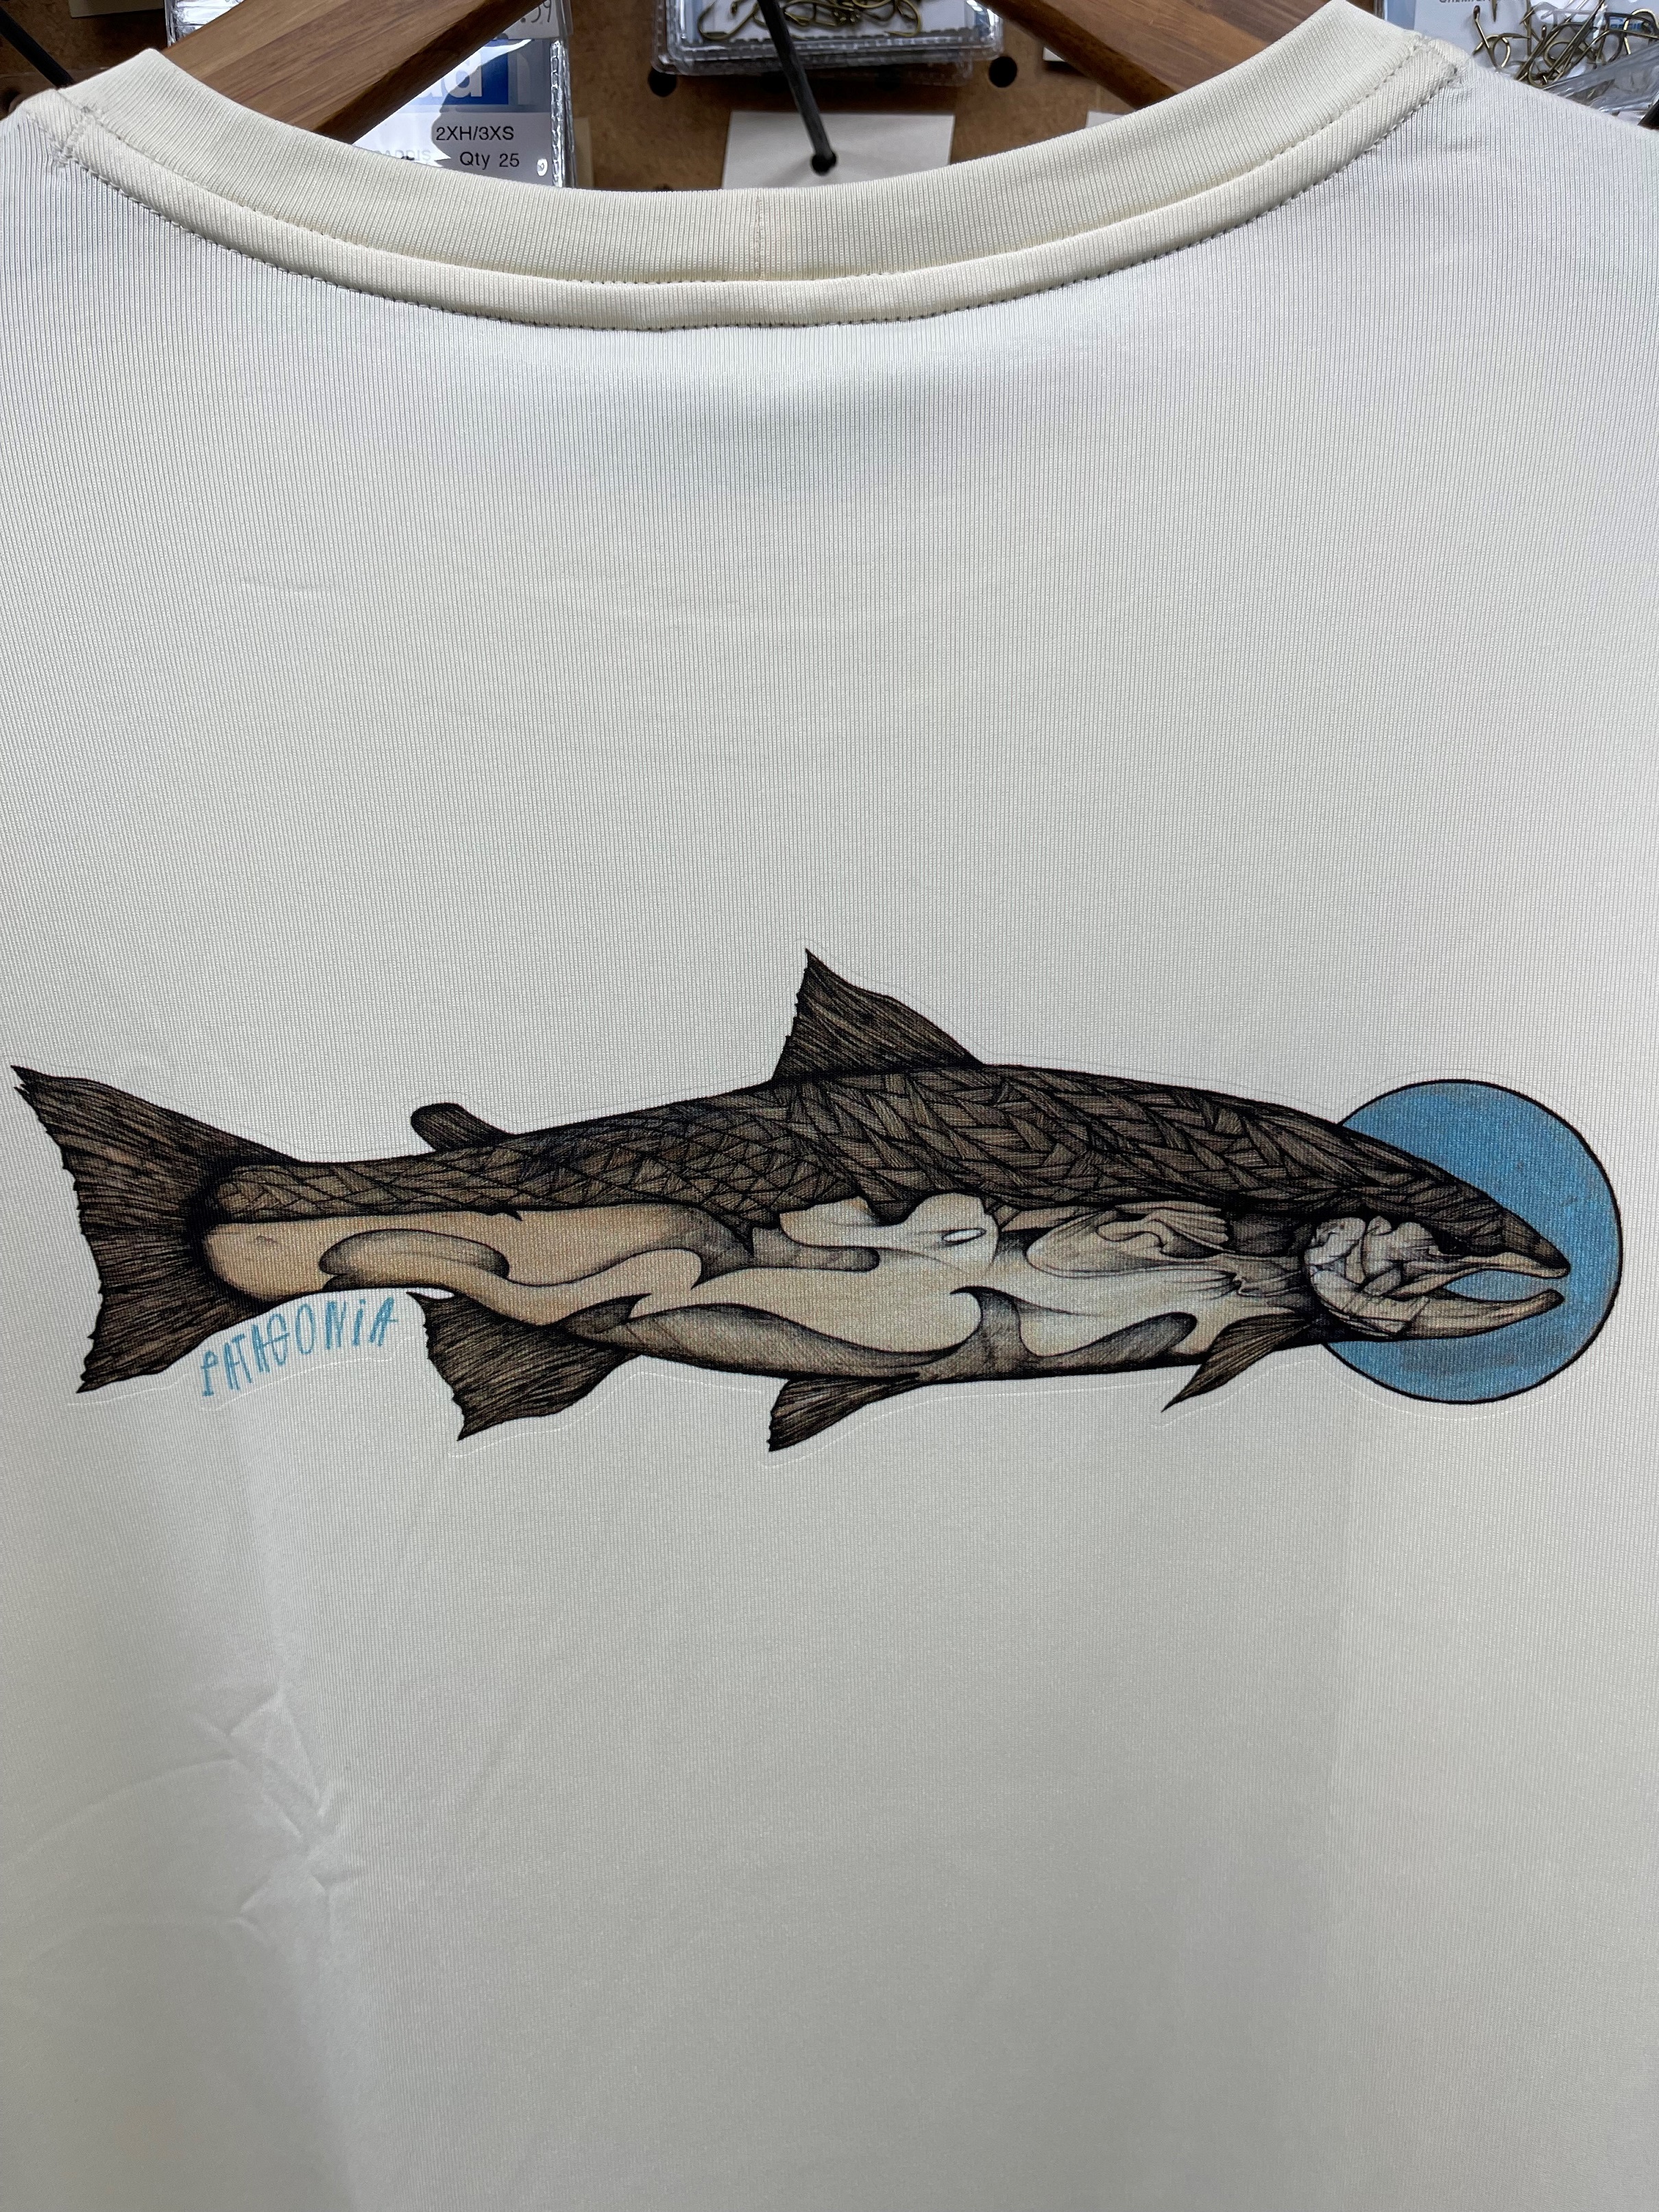 Patagonia M's Graphic Tech Fish Tee - Moon Fish: Toasted White - Large